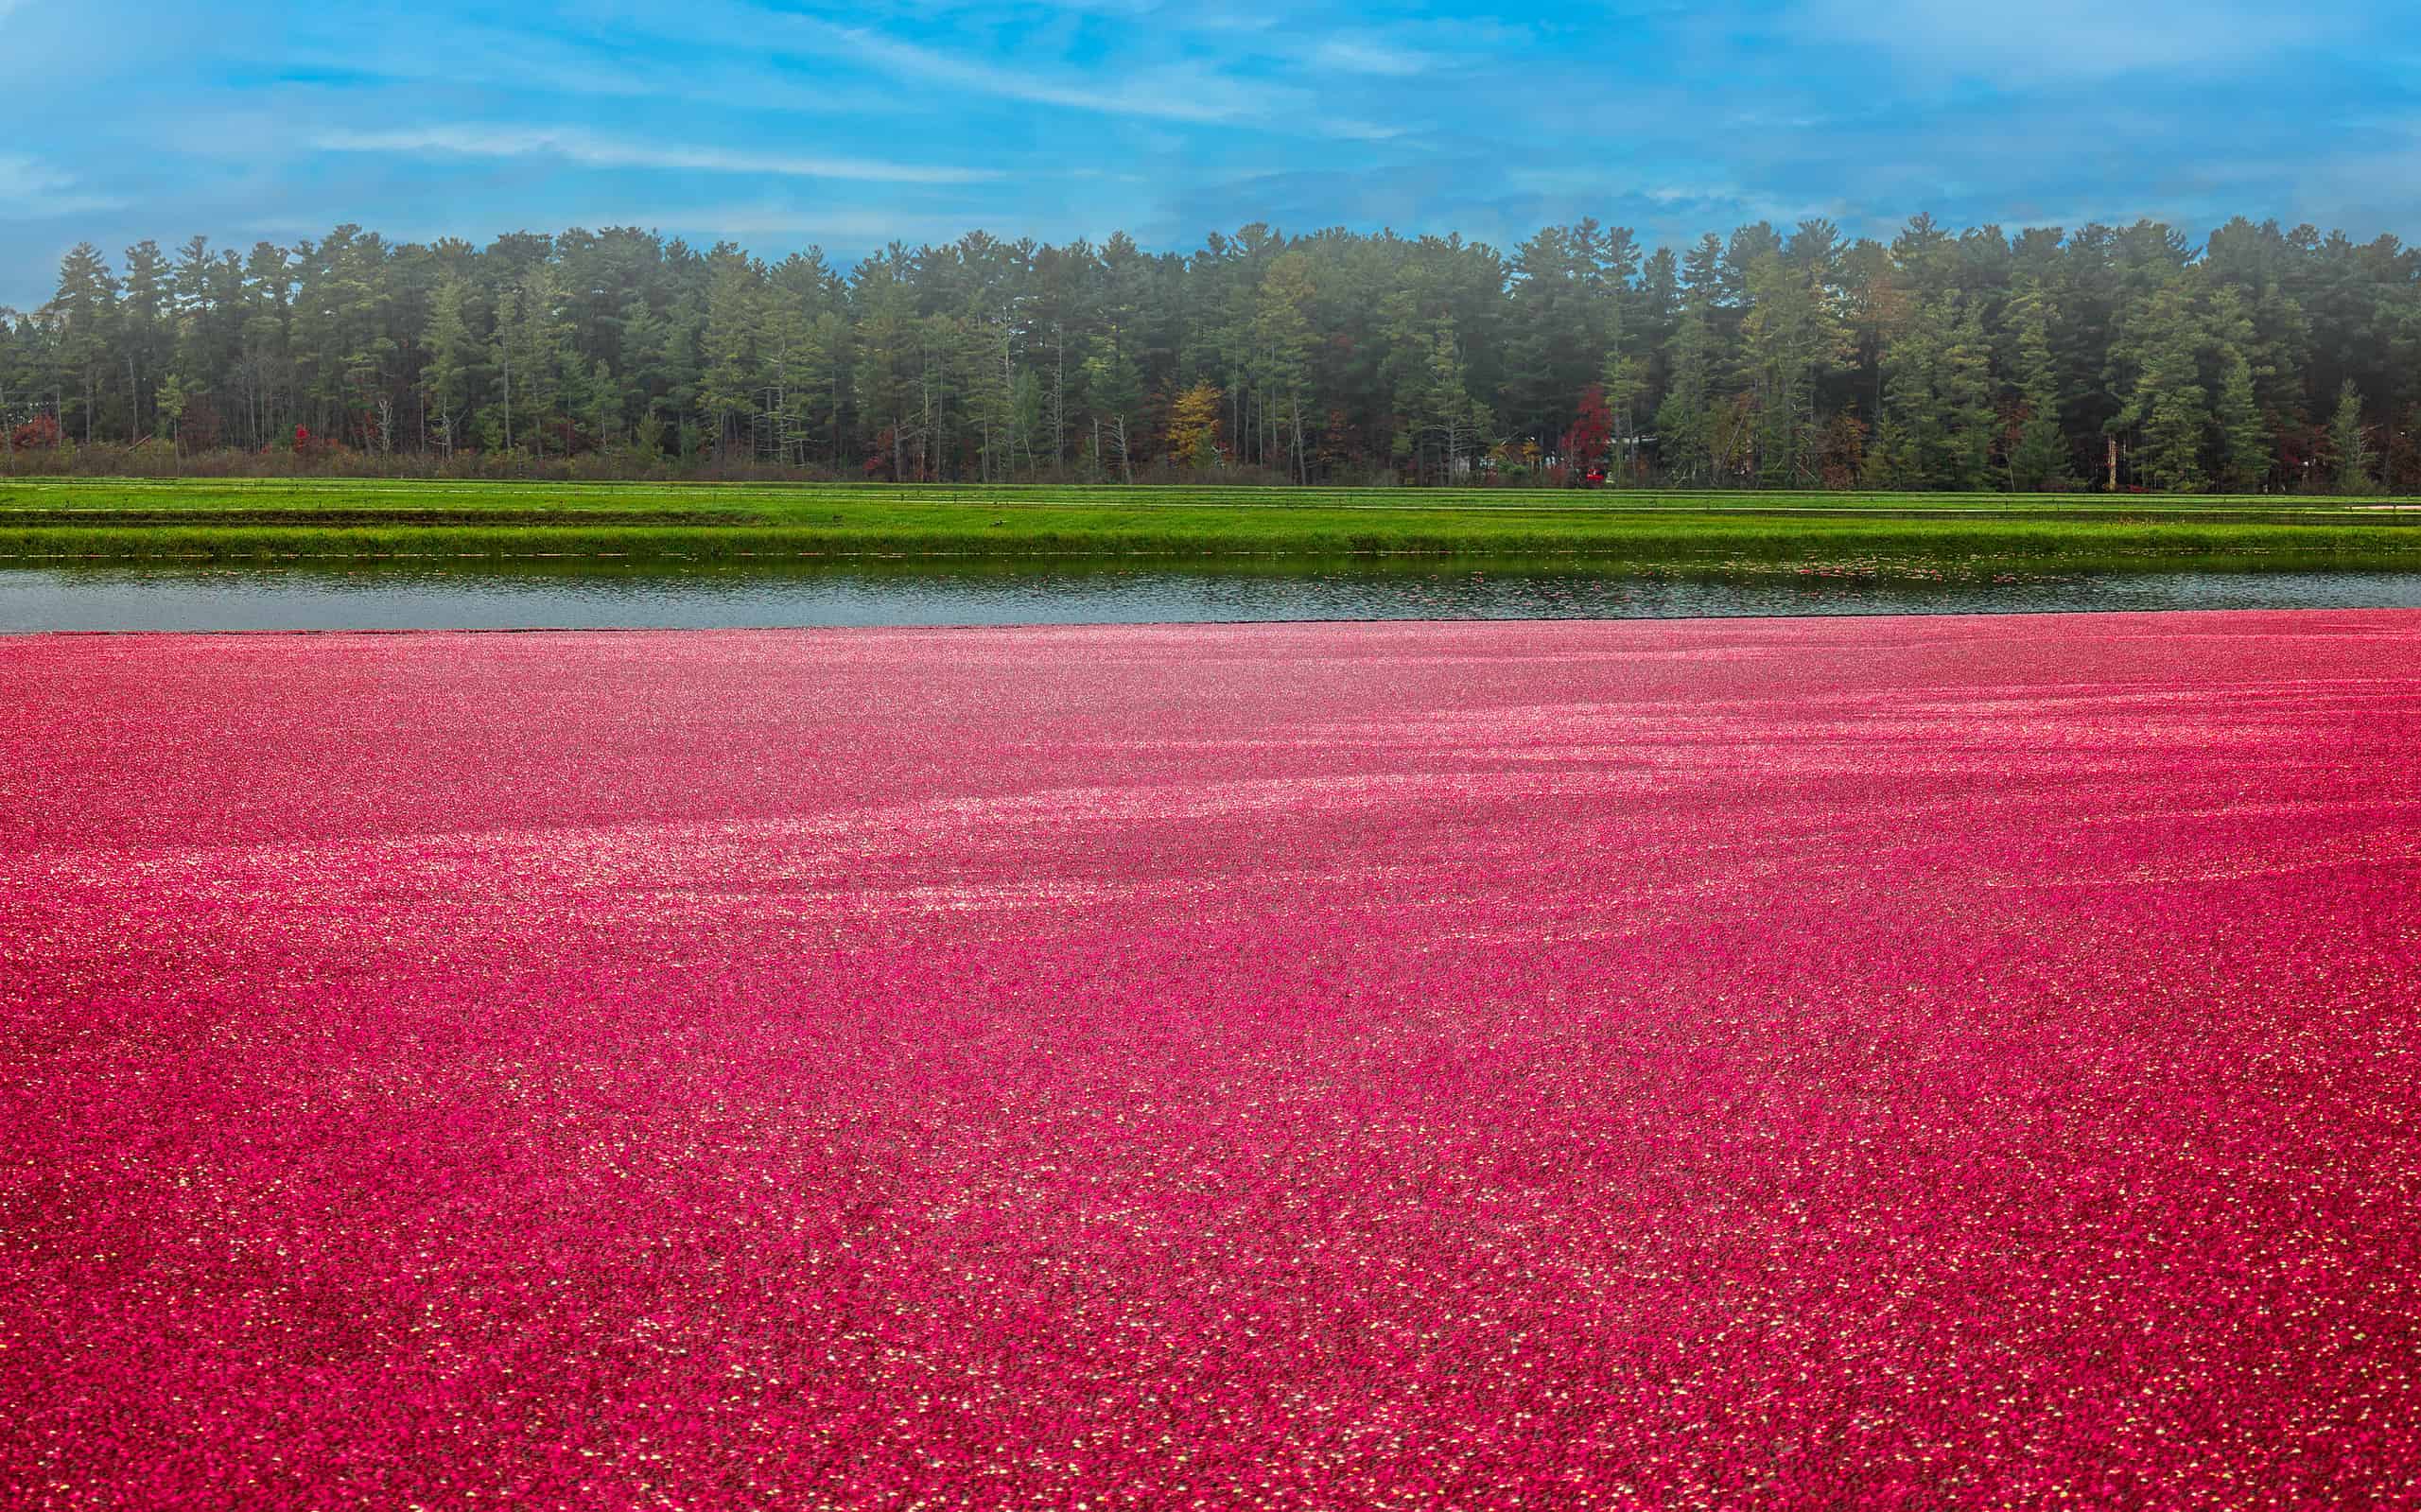 A Wisconsin cranberry marsh in the fall during harvest showing cranberries in flooded bog